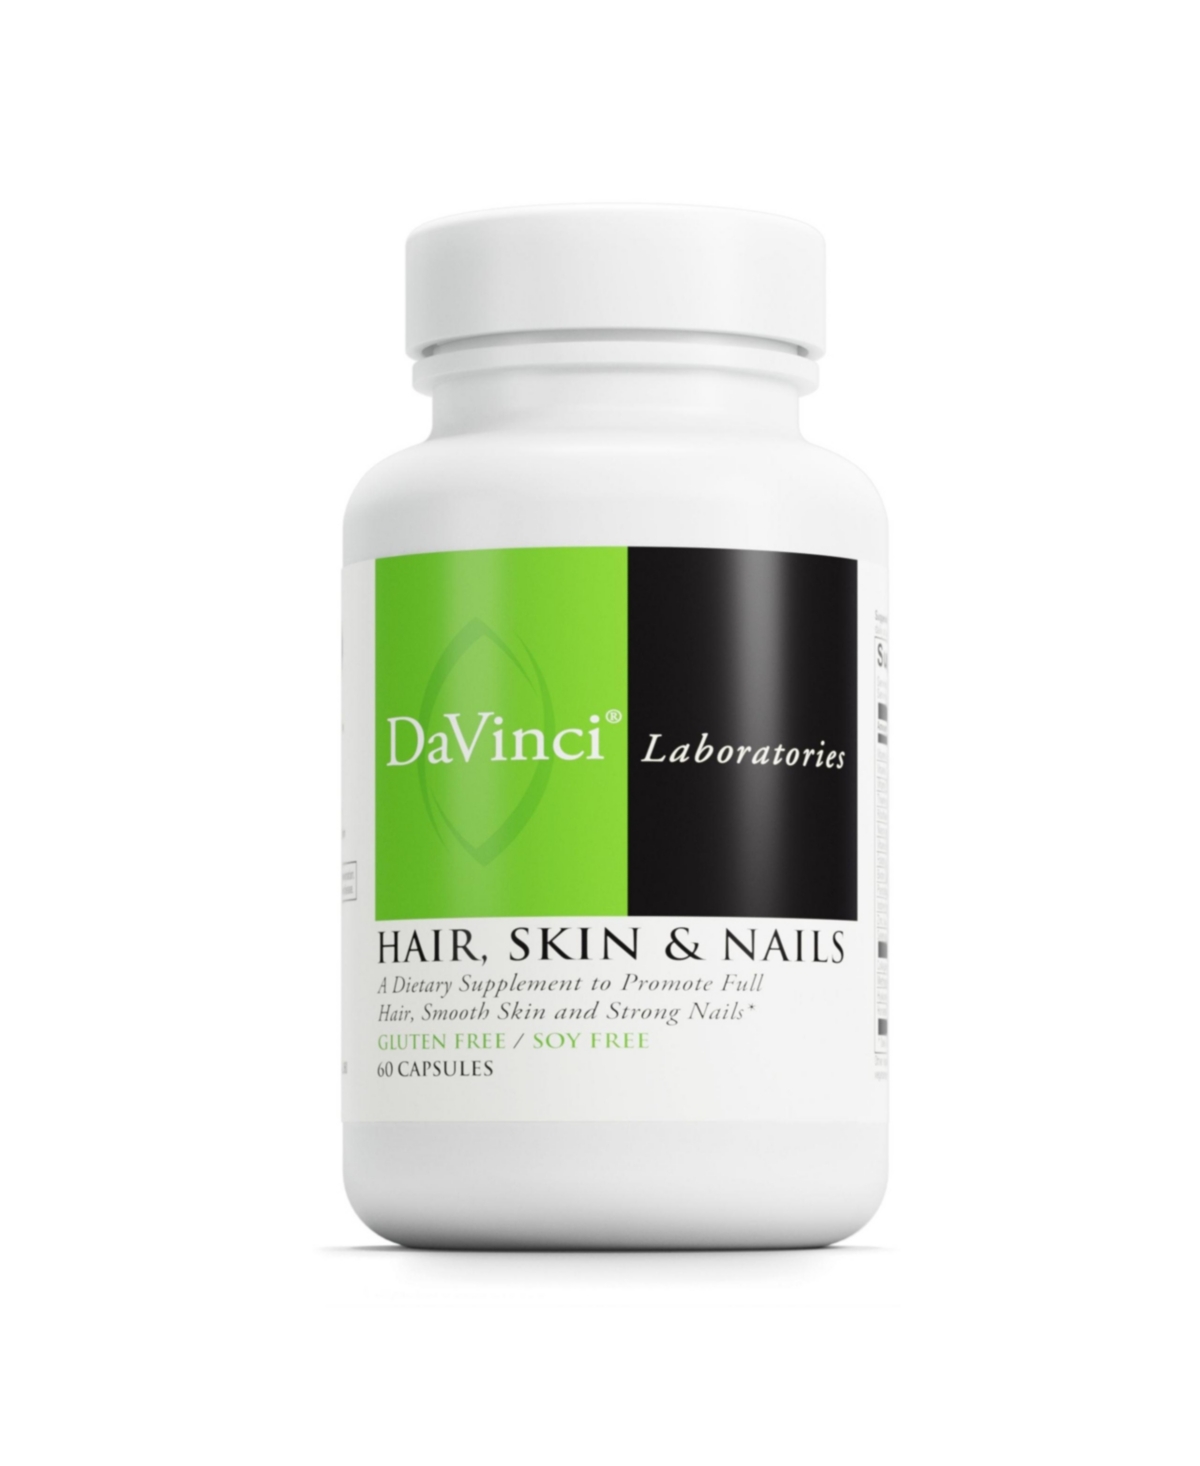 DaVinci Labs Hair, Skin & Nails - Dietary Supplement to Support Smooth, Healthy Skin, Strong Nails and Hair Health - With Vitamin C and D3, Minerals,